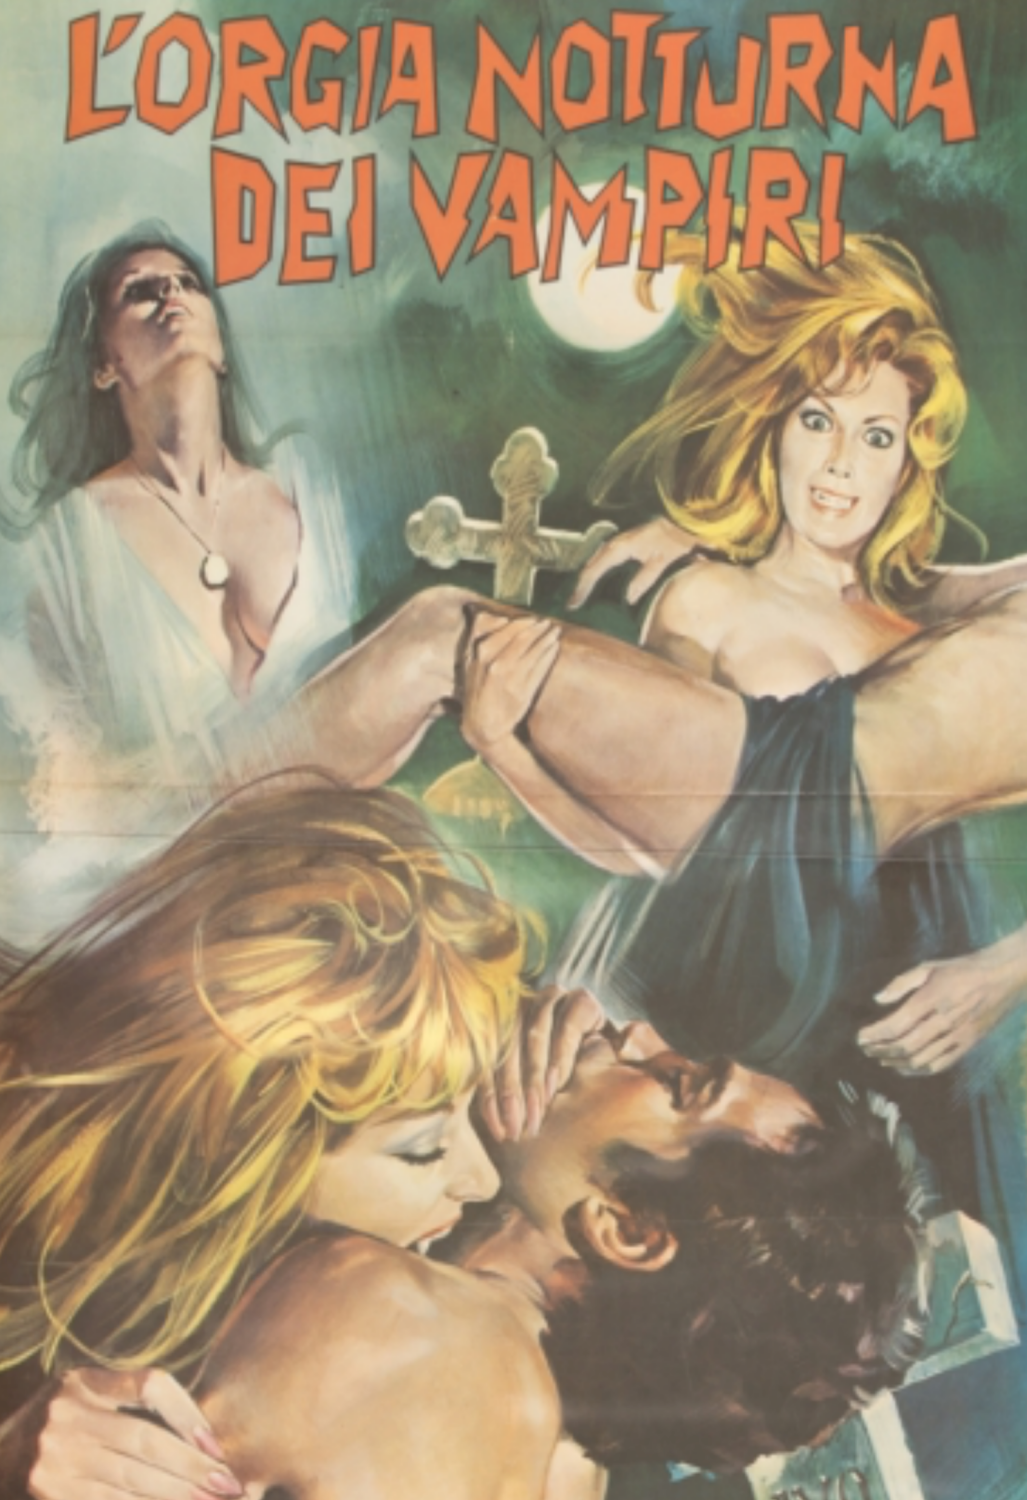 ROGUE VIDEO - rare horror DVDs - cult films & fiction "THE VAMPIRES NIGHT ORGY" (1972)